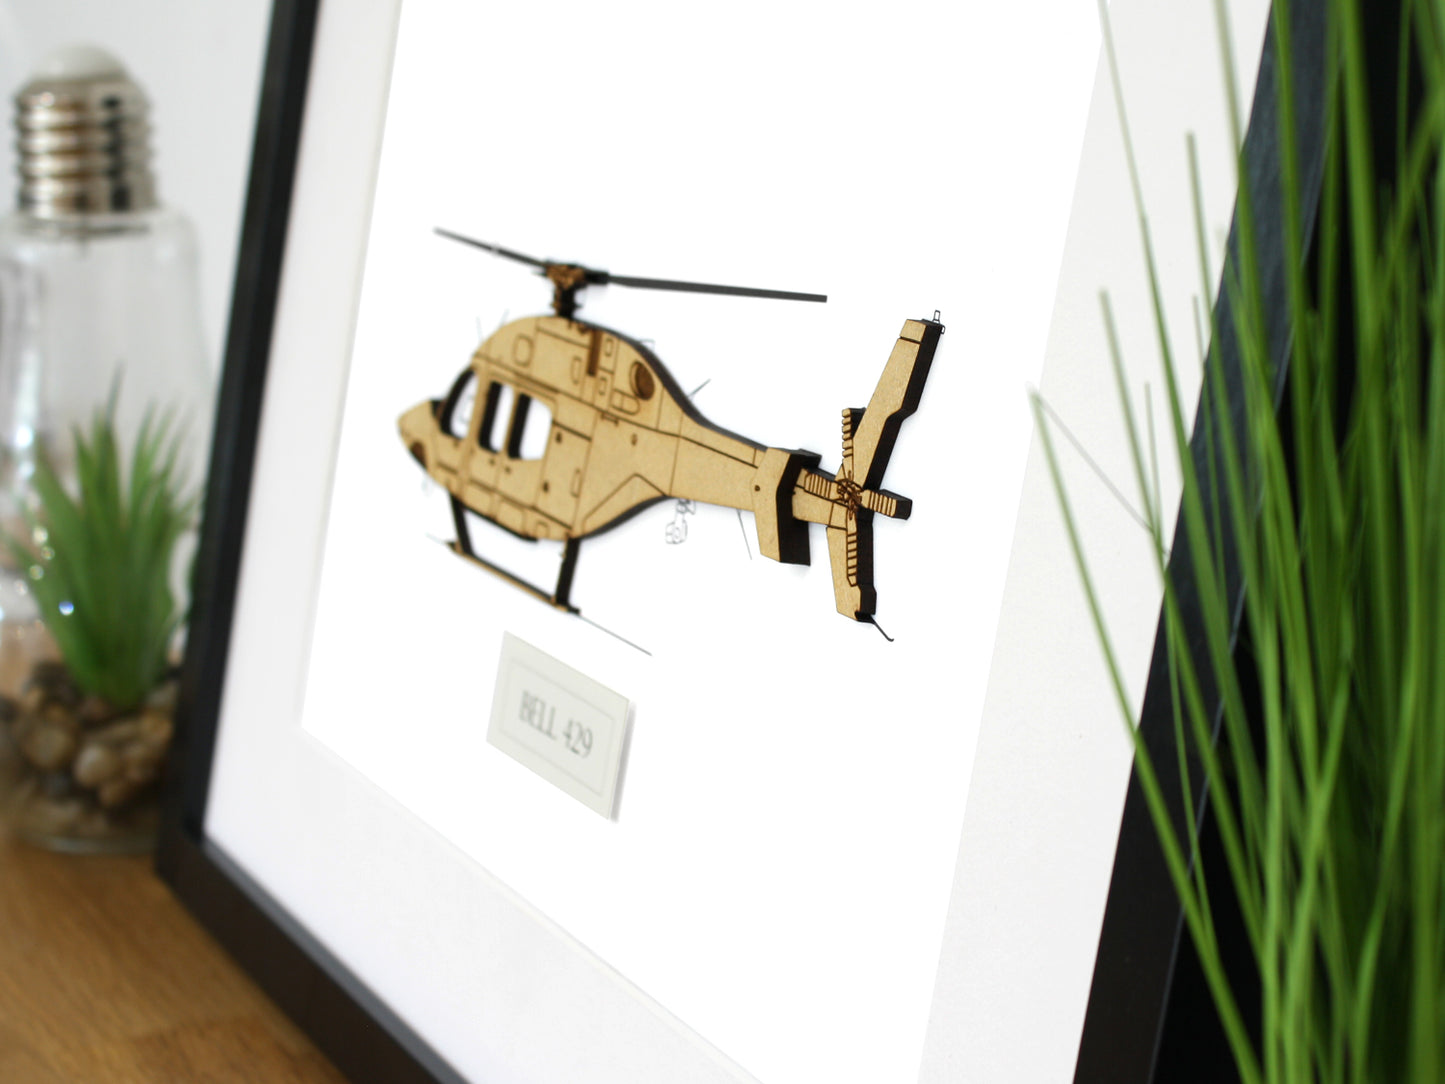 Bell 429 law enforcement helicopter art